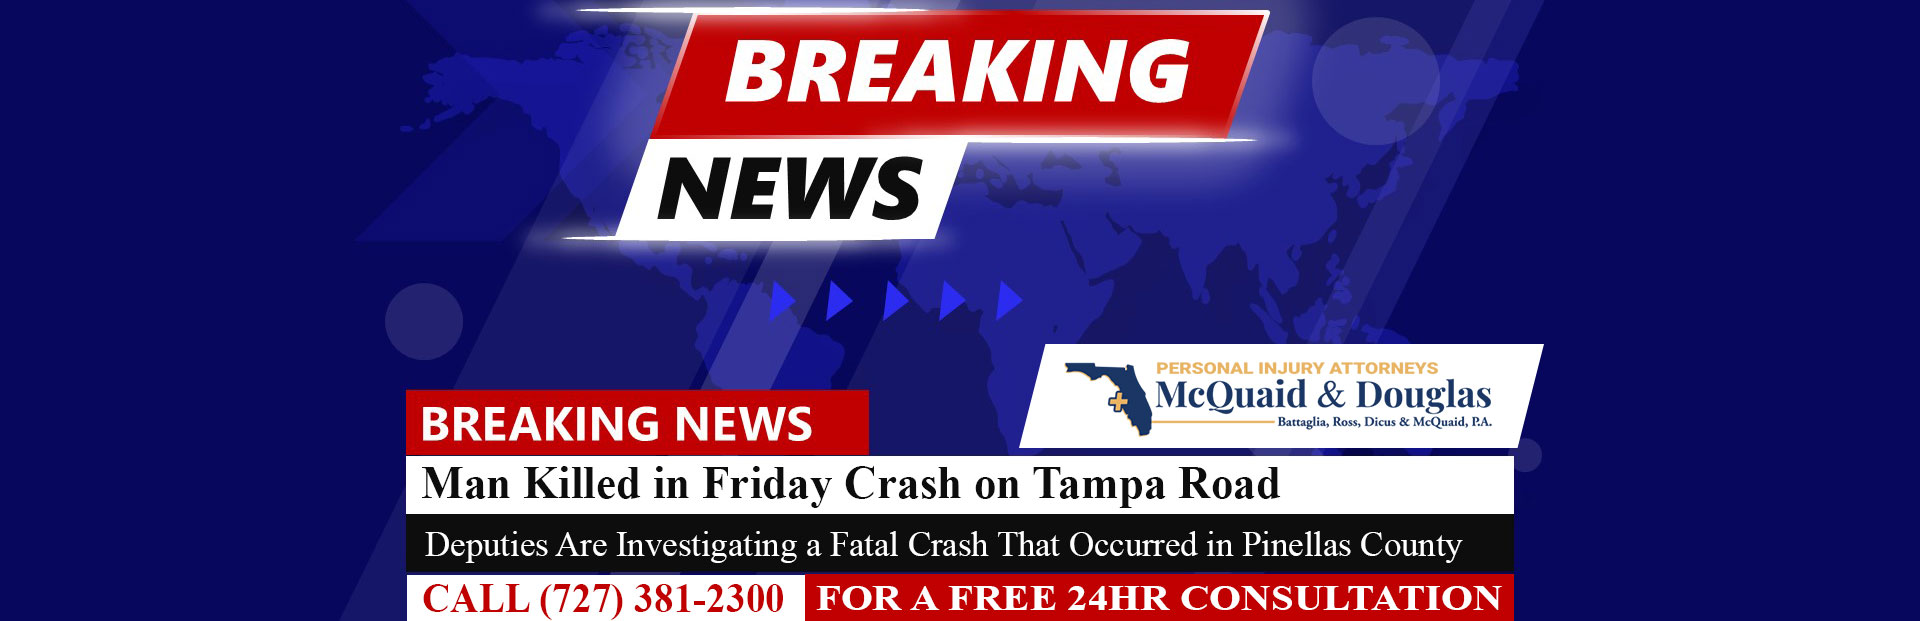 [9-3-22] Man Killed in Friday Crash on Tampa Road